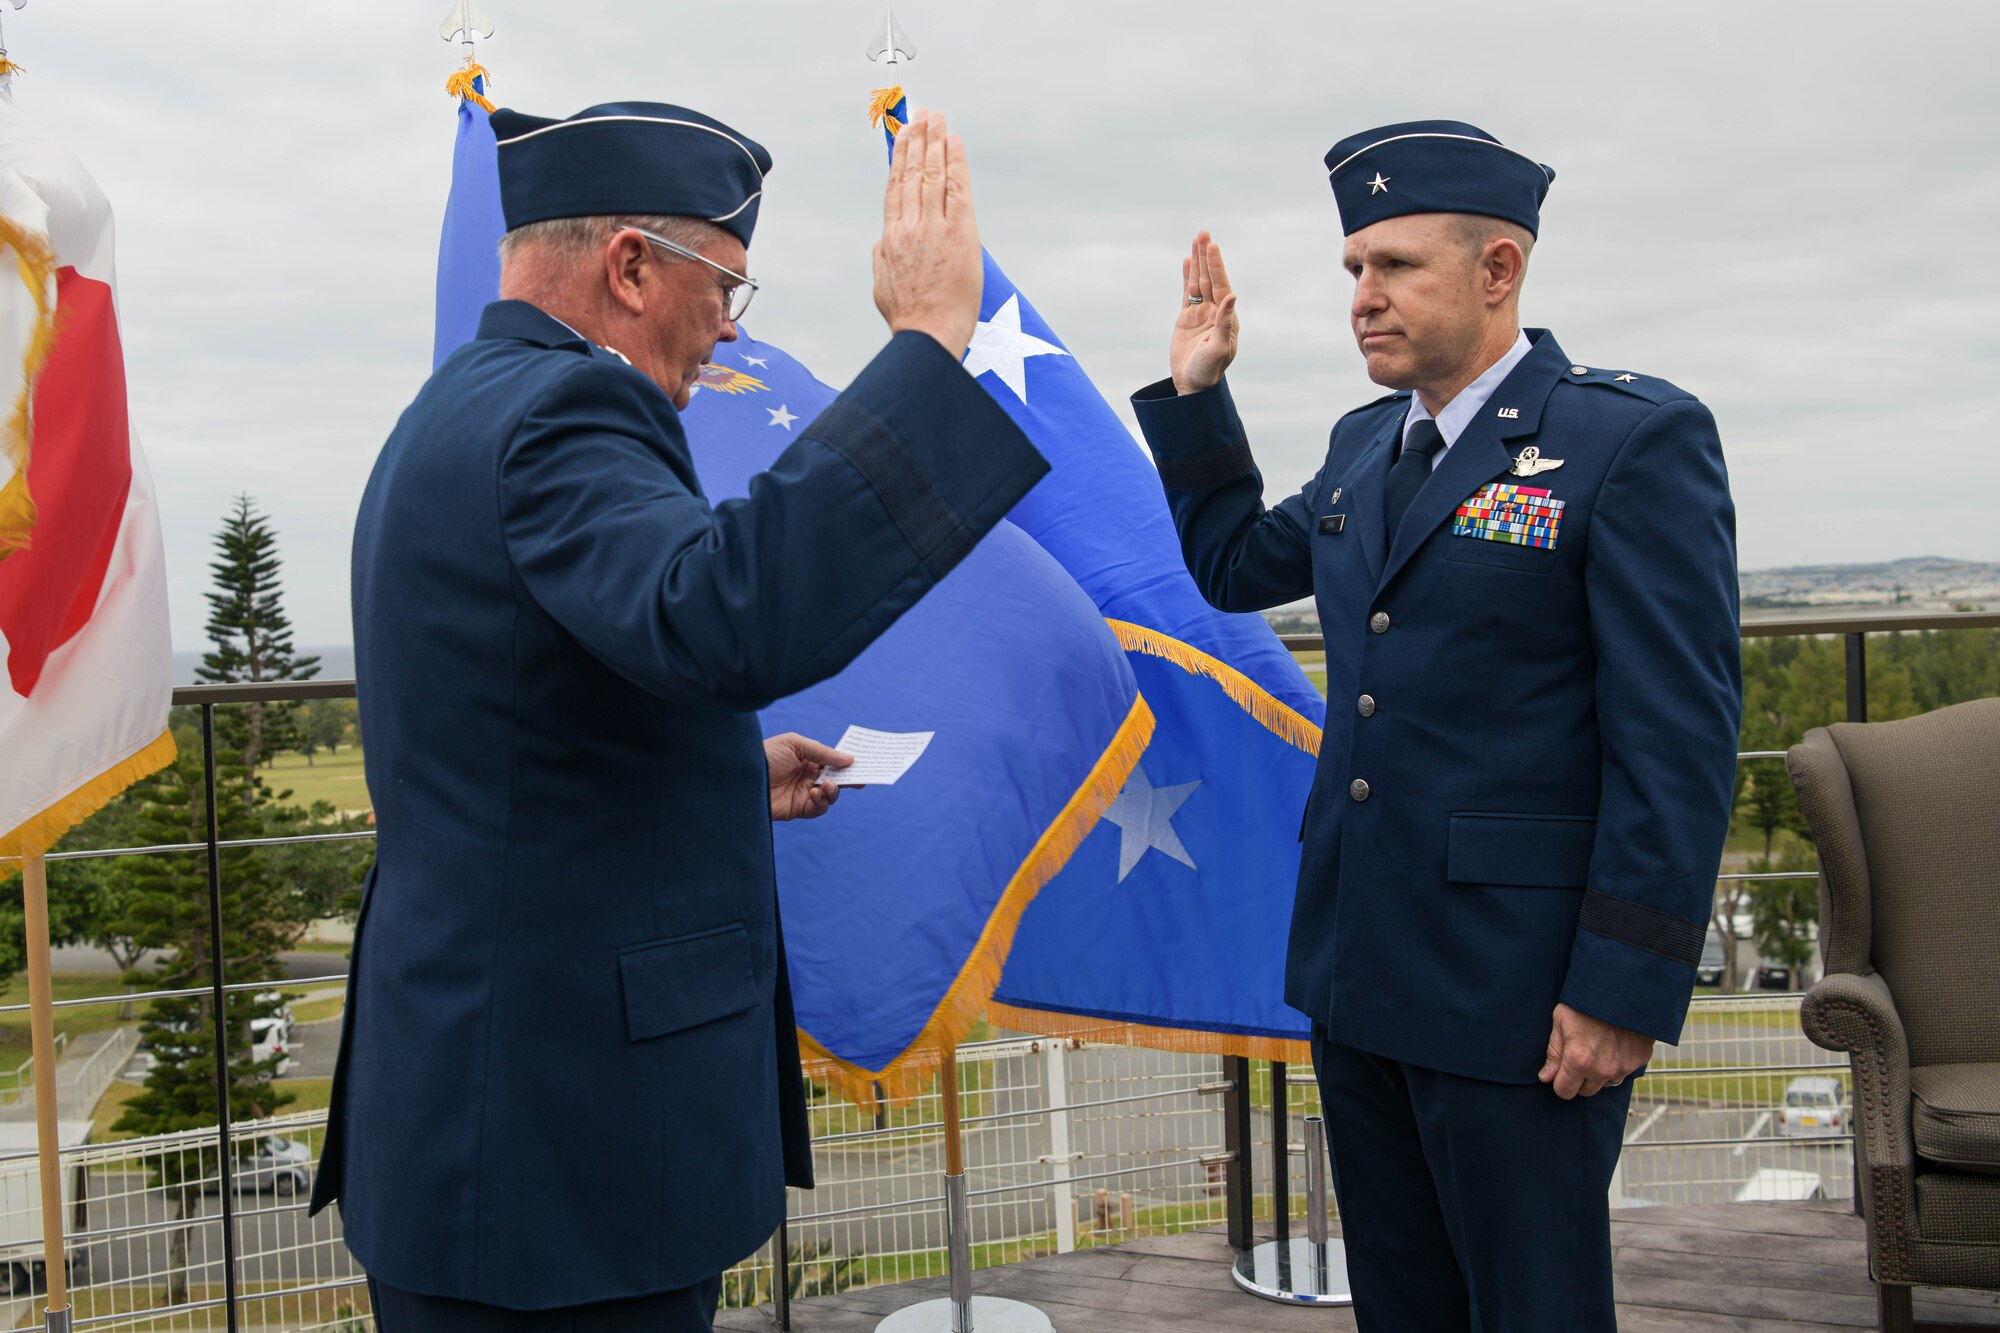 U.S. Air Force Lt. Gen. Ricky Rupp, left, U.S. Forces Japan and Fifth Air Force commander, leads U.S. Air Force Brig. Gen. Nicholas Evans, right, 18th Wing commander, in the oath of office during a promotion ceremony.